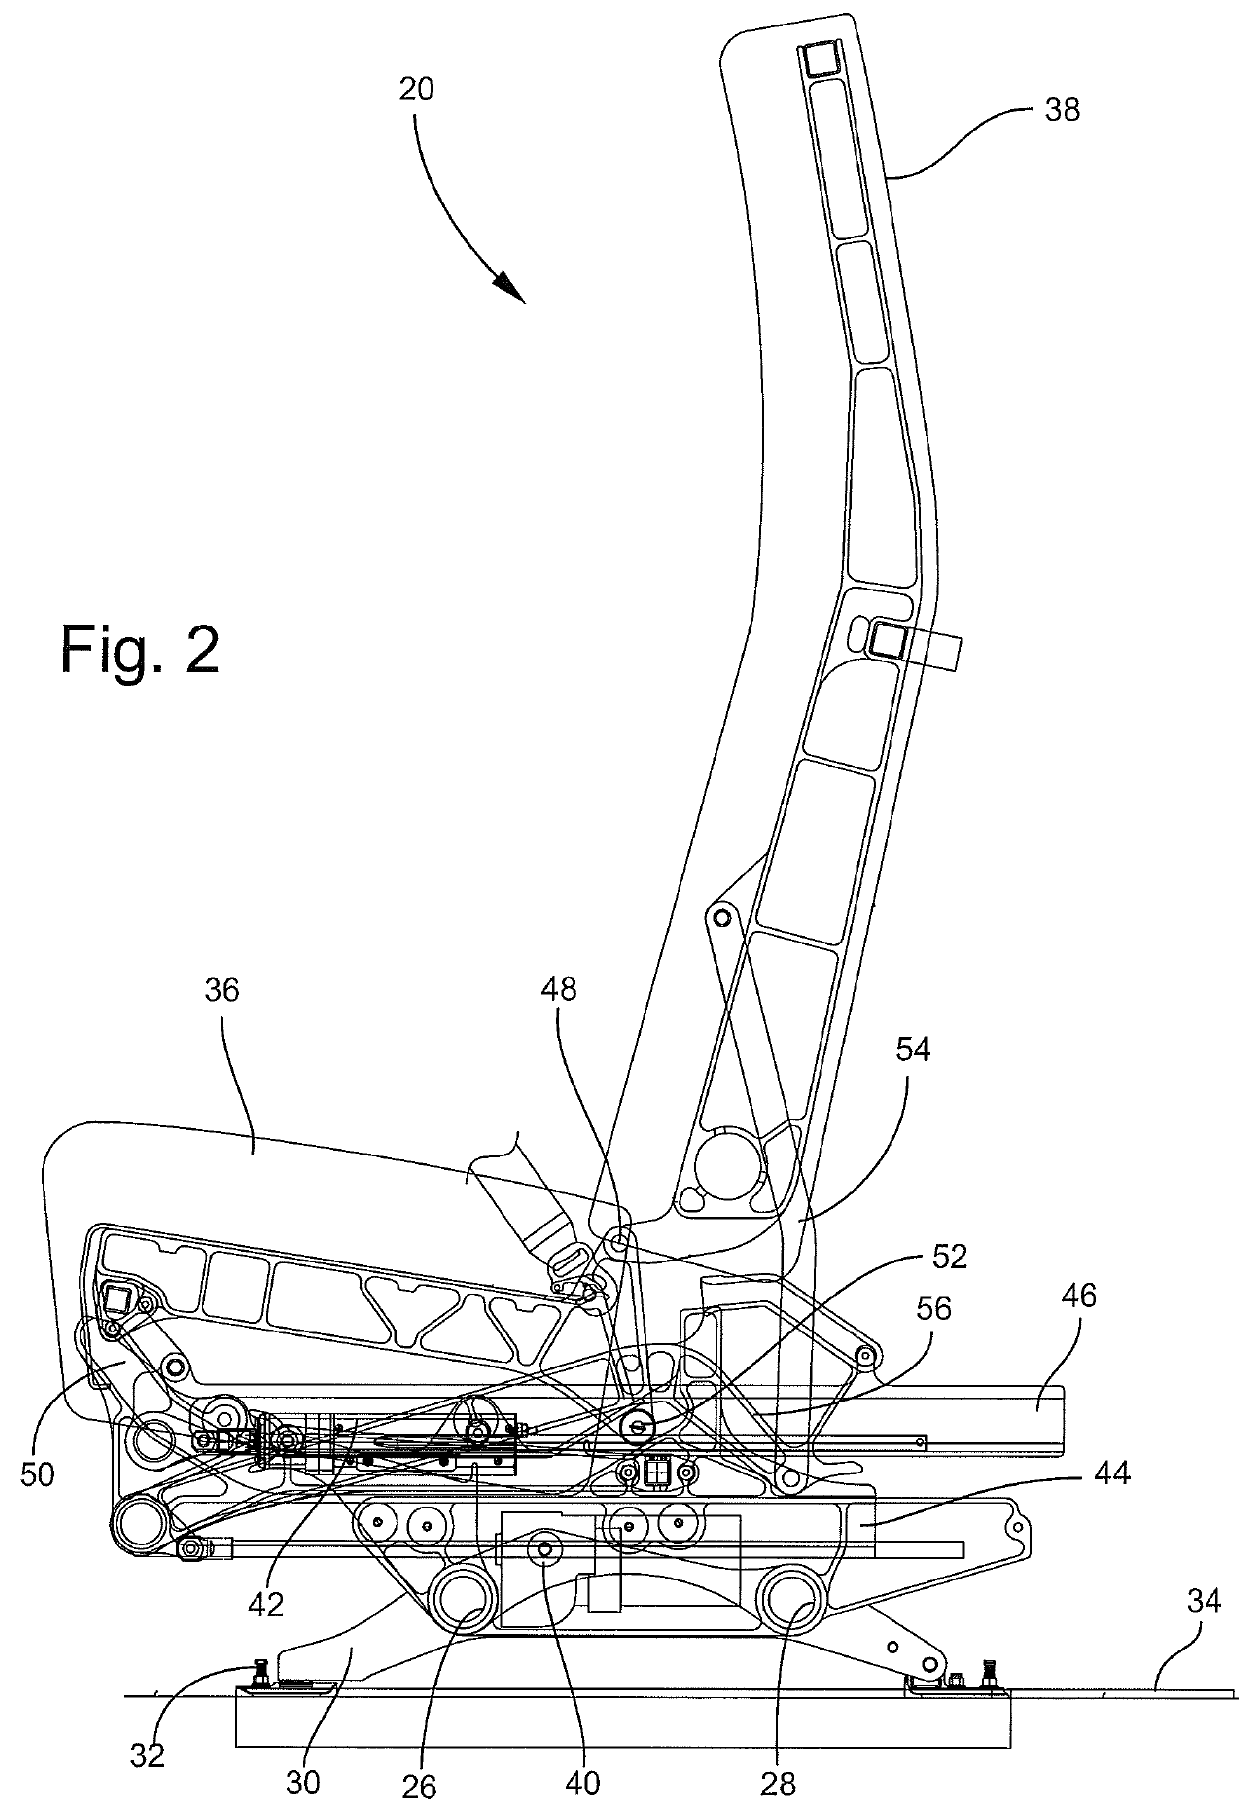 Aircraft seat employing dual actuators for seat translaton and seat recline